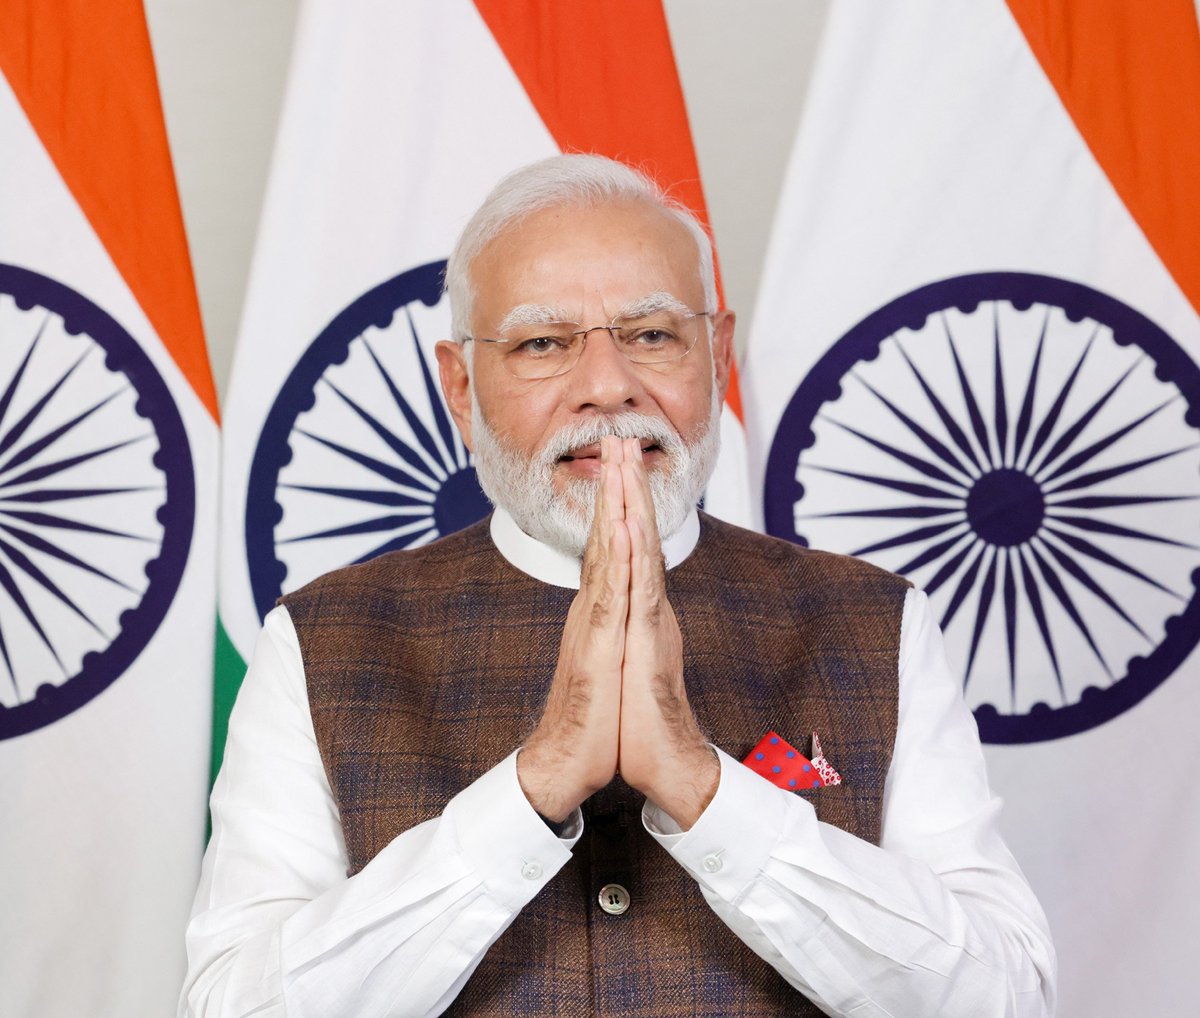 Warmest birthday wishes to our Prime Minister, Shri @narendramodi ji. Your leadership has taken India to remarkable heights globally. May you continue to lead us towards prosperity and development. 🇮🇳